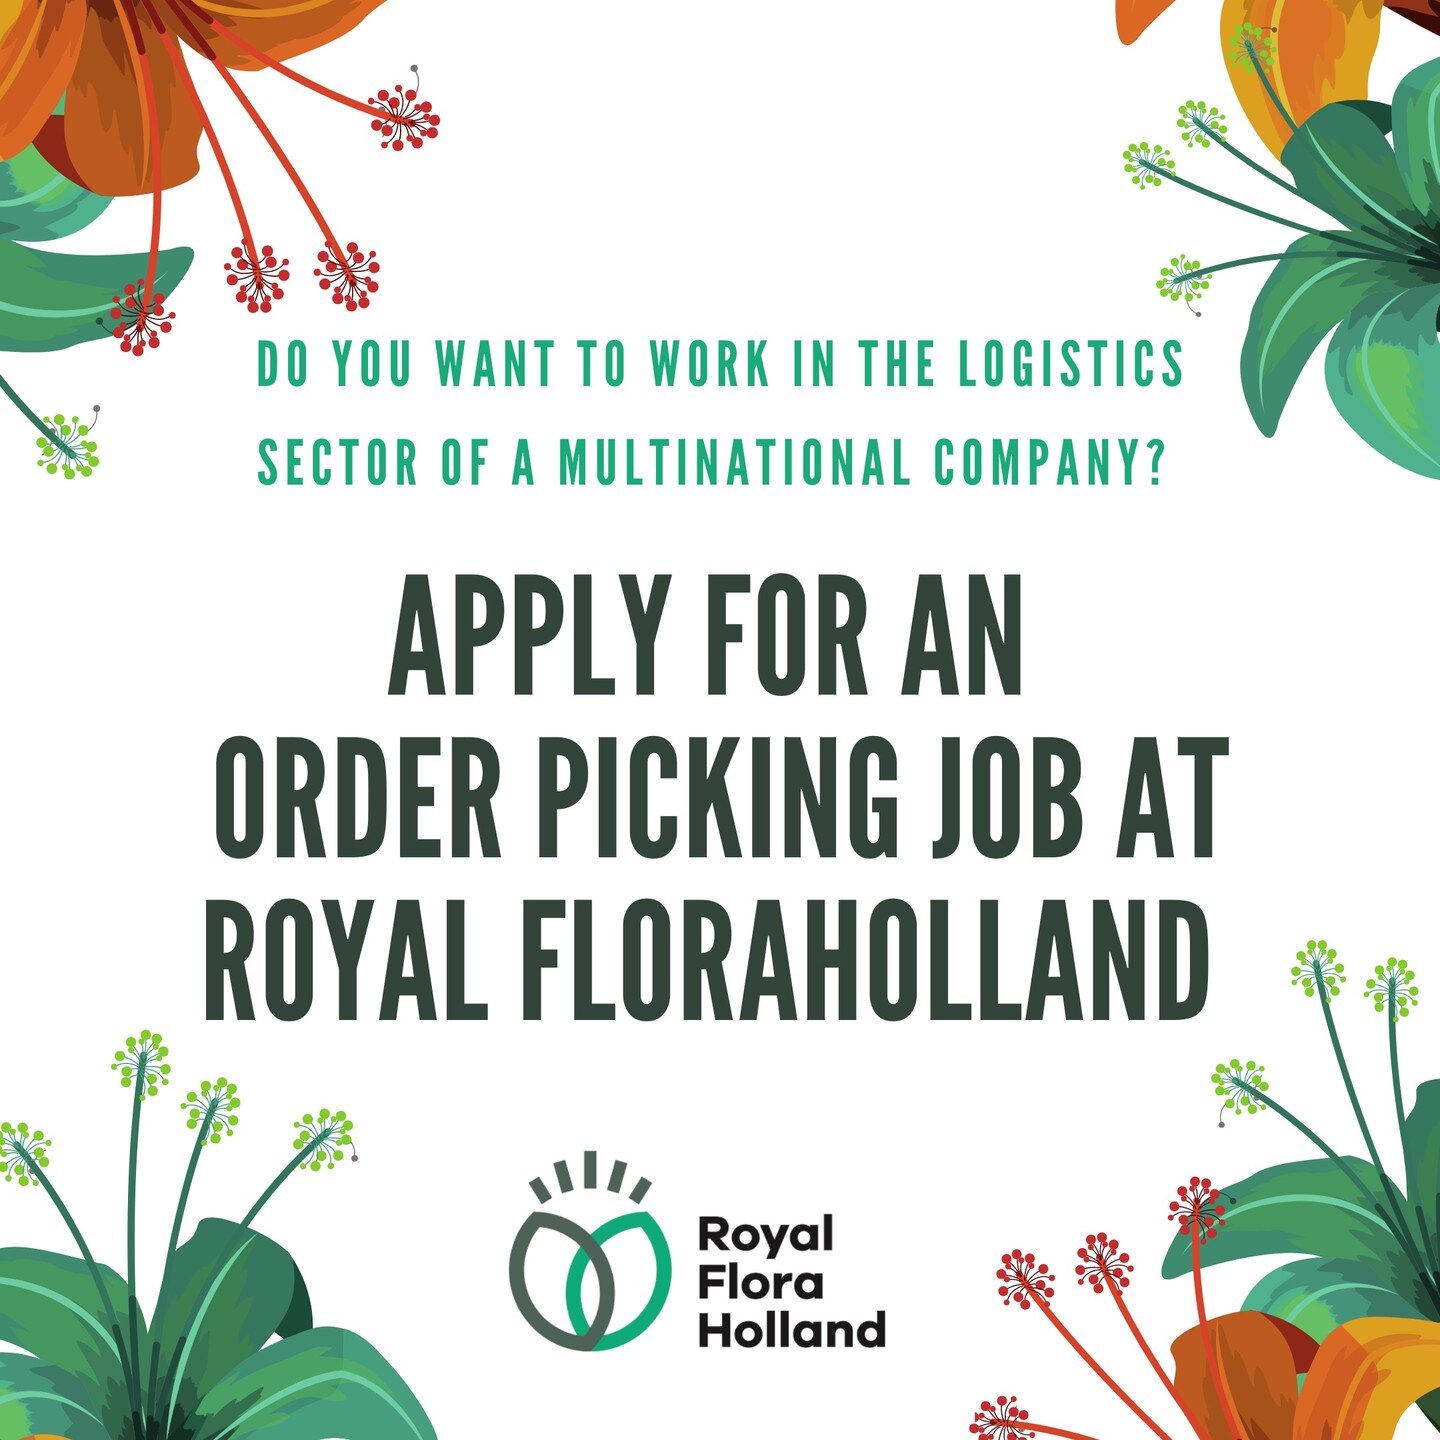 Do you want to work in the logistics sector of a multinational company? 

Apply for an order picking job at royal FloraHolland

Royal FloraHolland is one of the largest auction houses in the world and sells flowers to clients located all over the glo